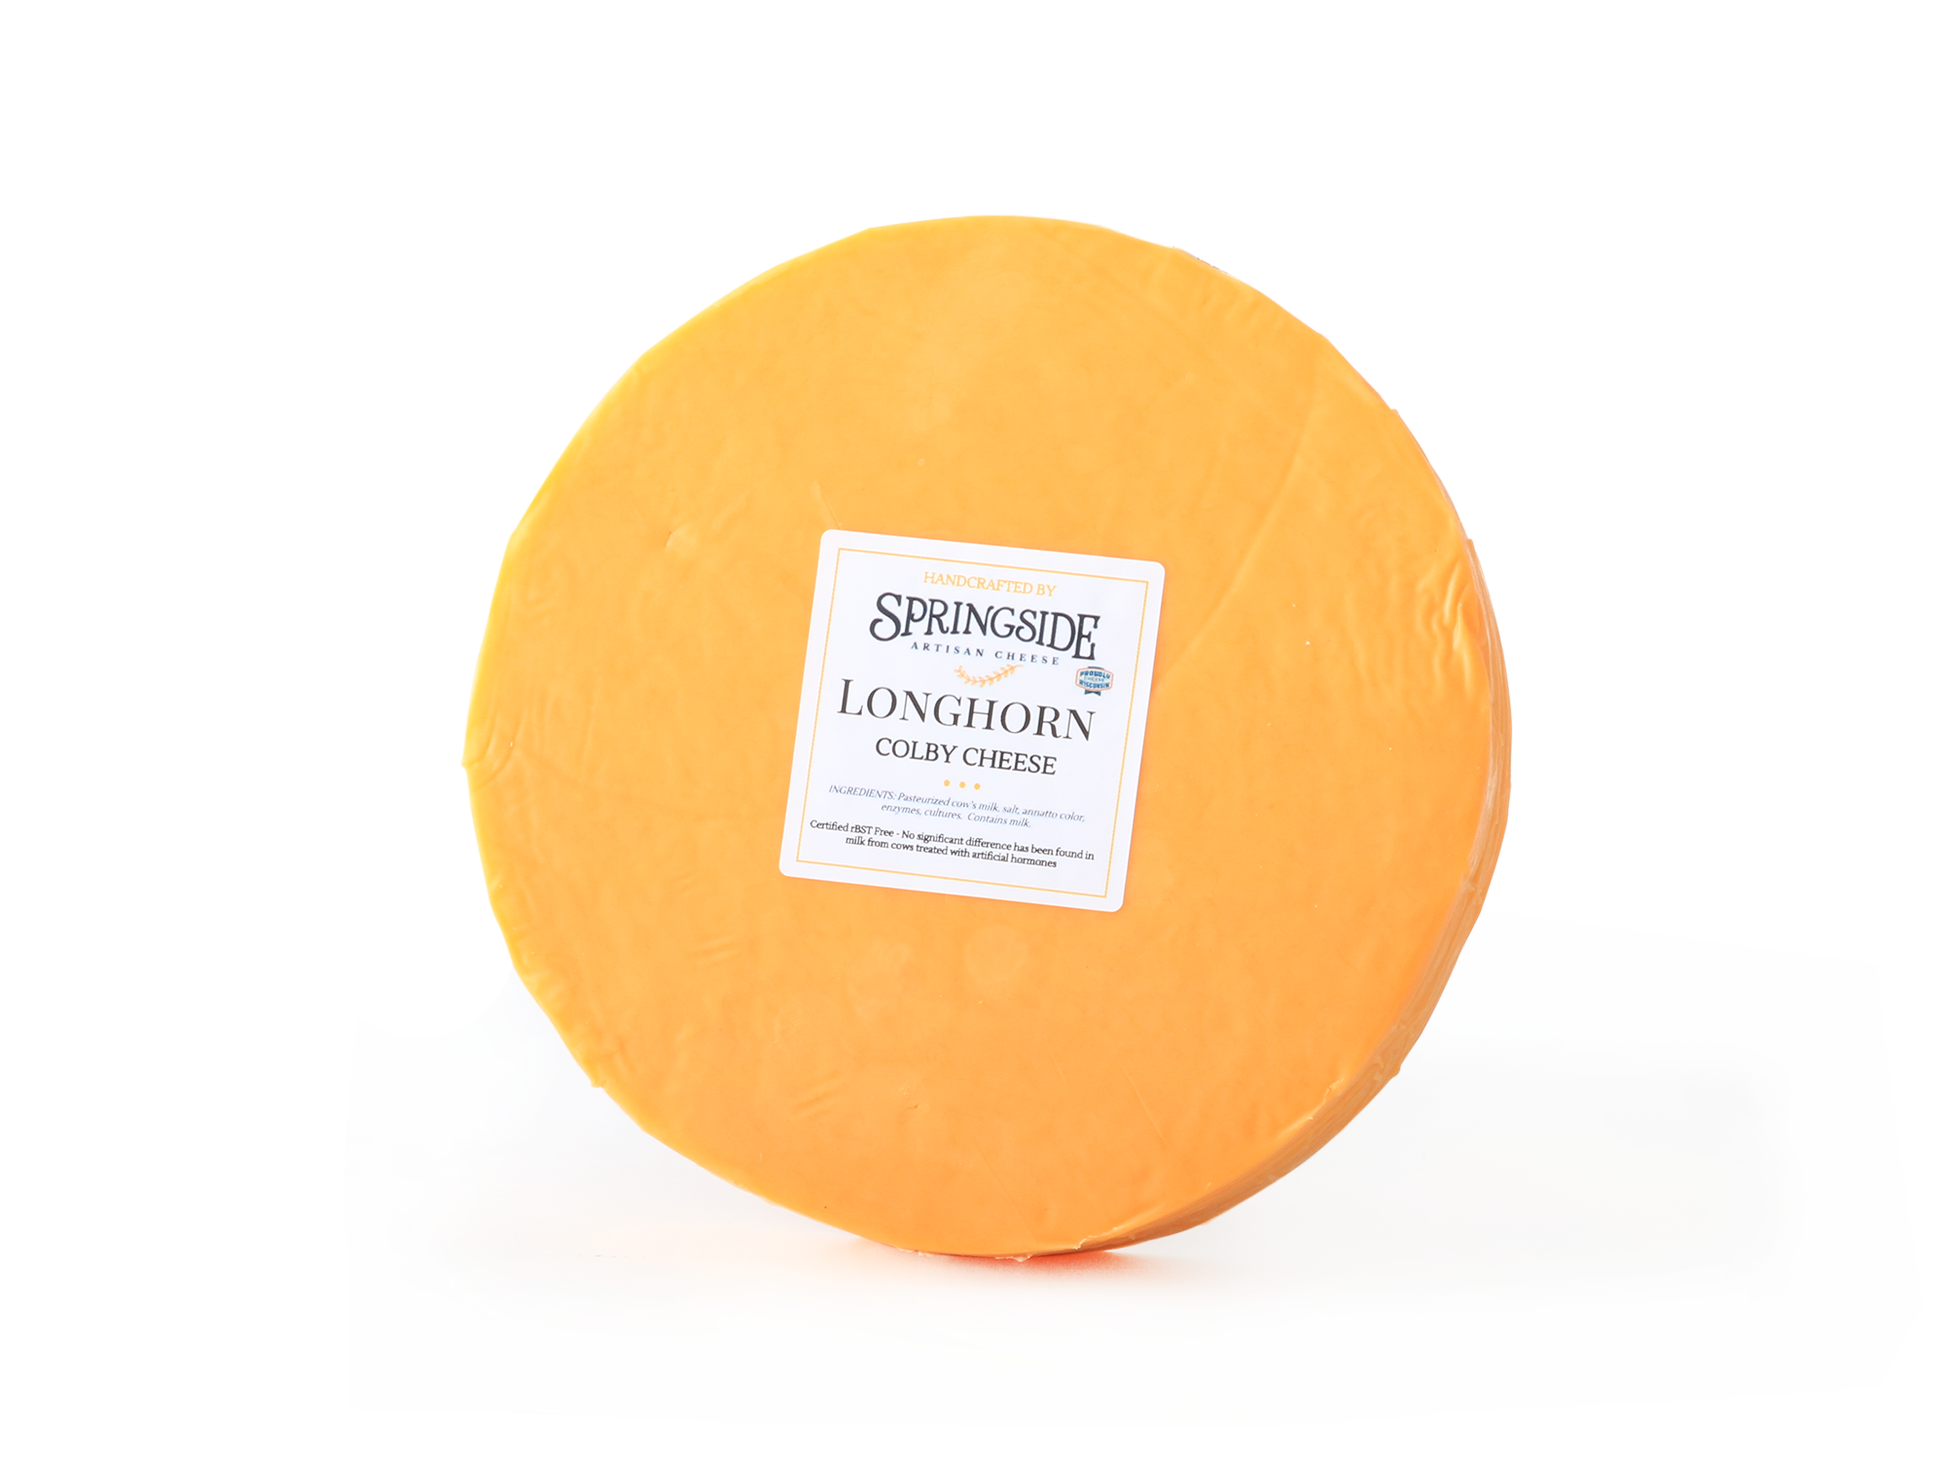 1 pound piece of Longhorn Colby cheese